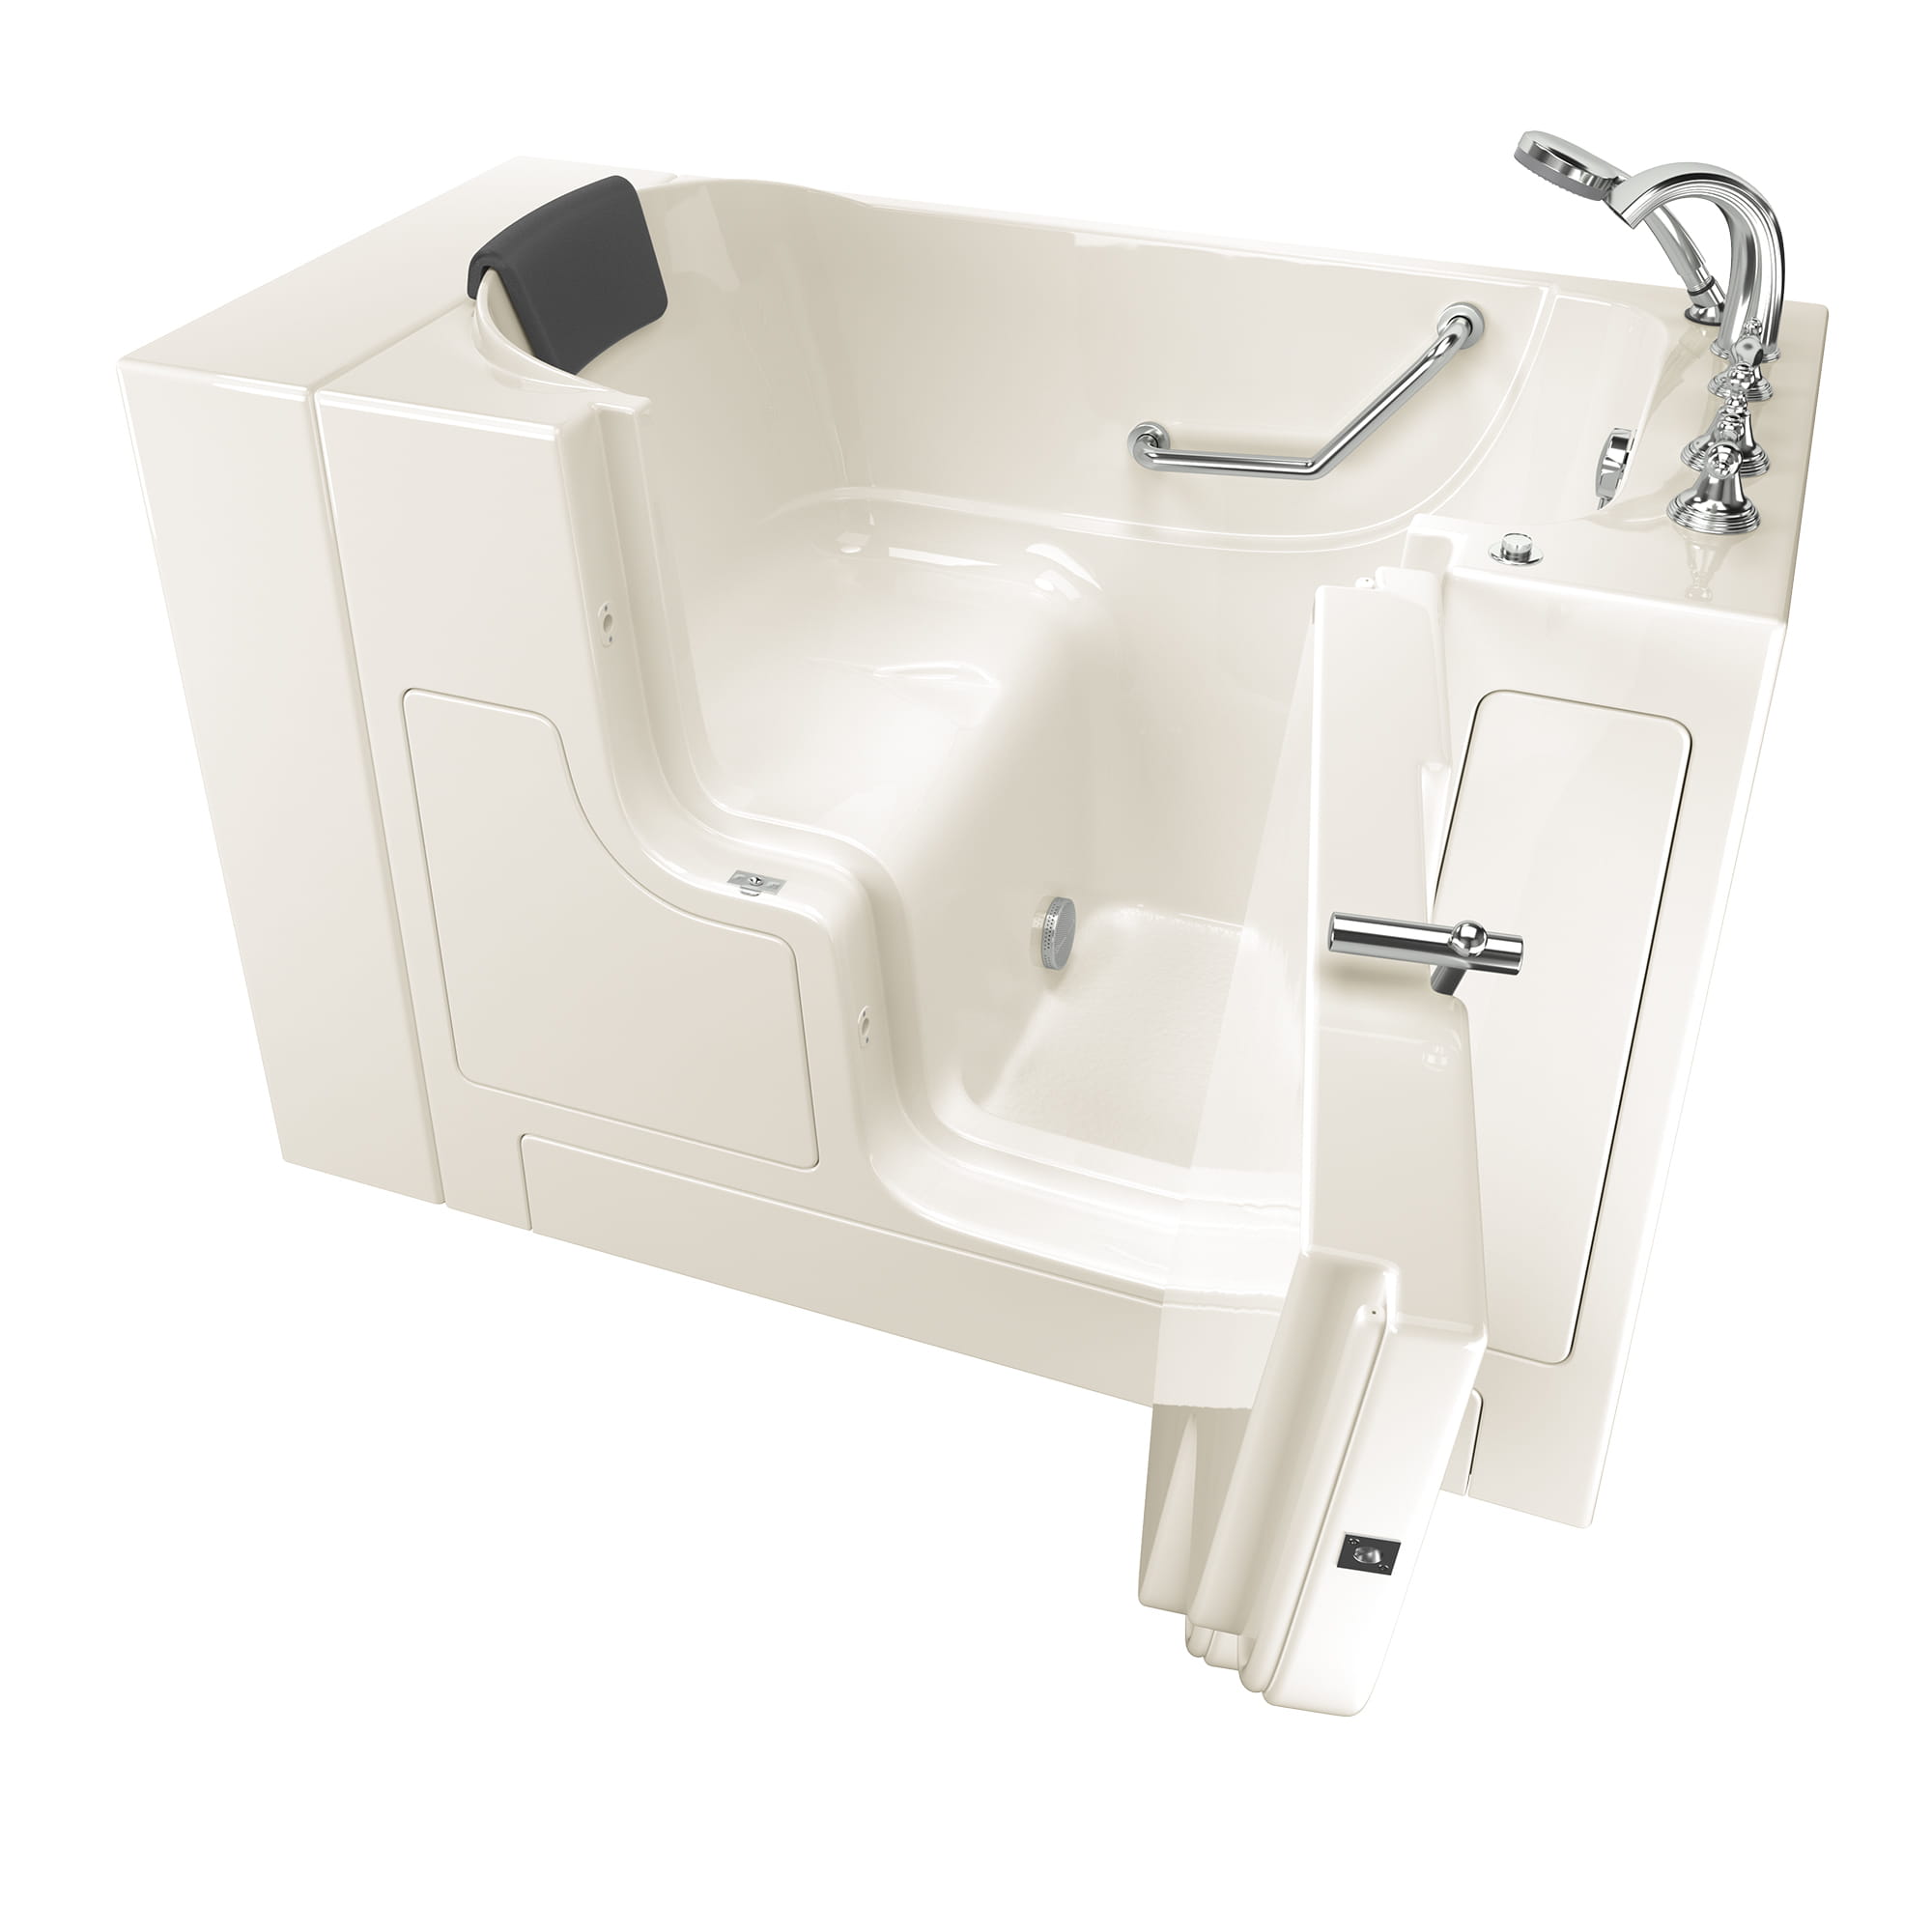 Gelcoat Premium Series 30 x 52  Inch Walk in Tub With Soaker System   Right Hand Drain With Faucet WIB LINEN